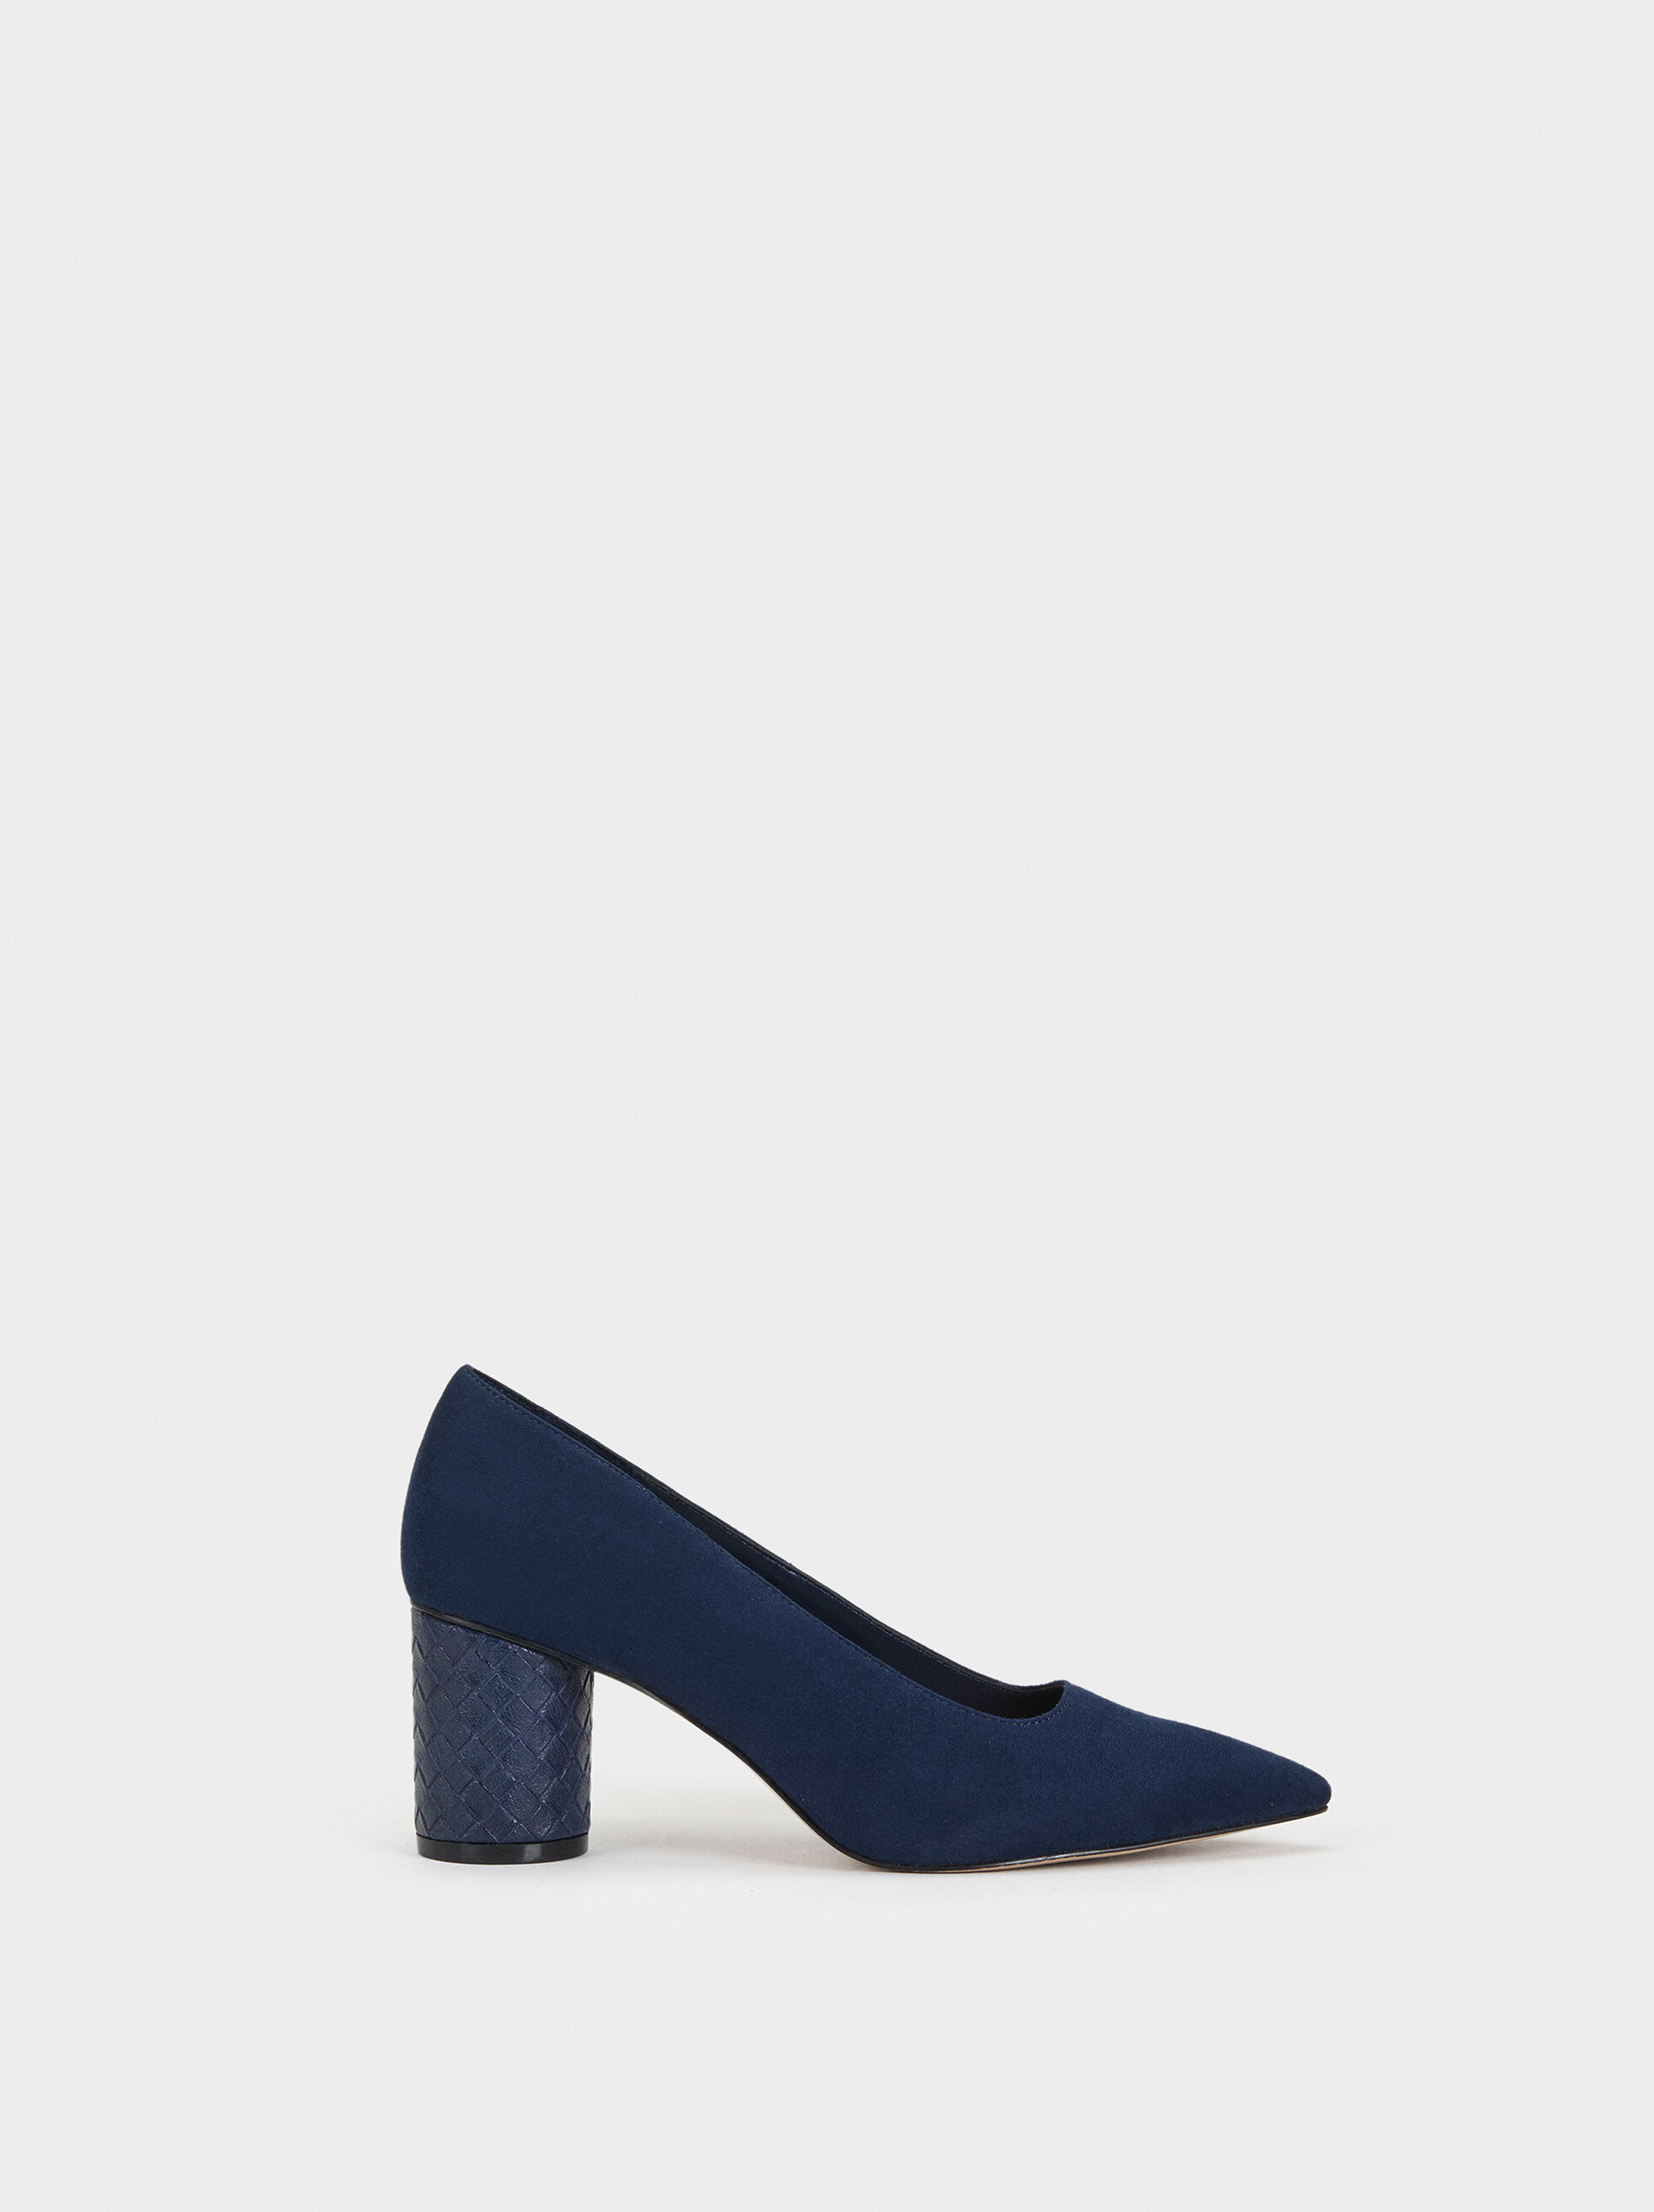 Shoes With Woven Heel - Navy - Woman 